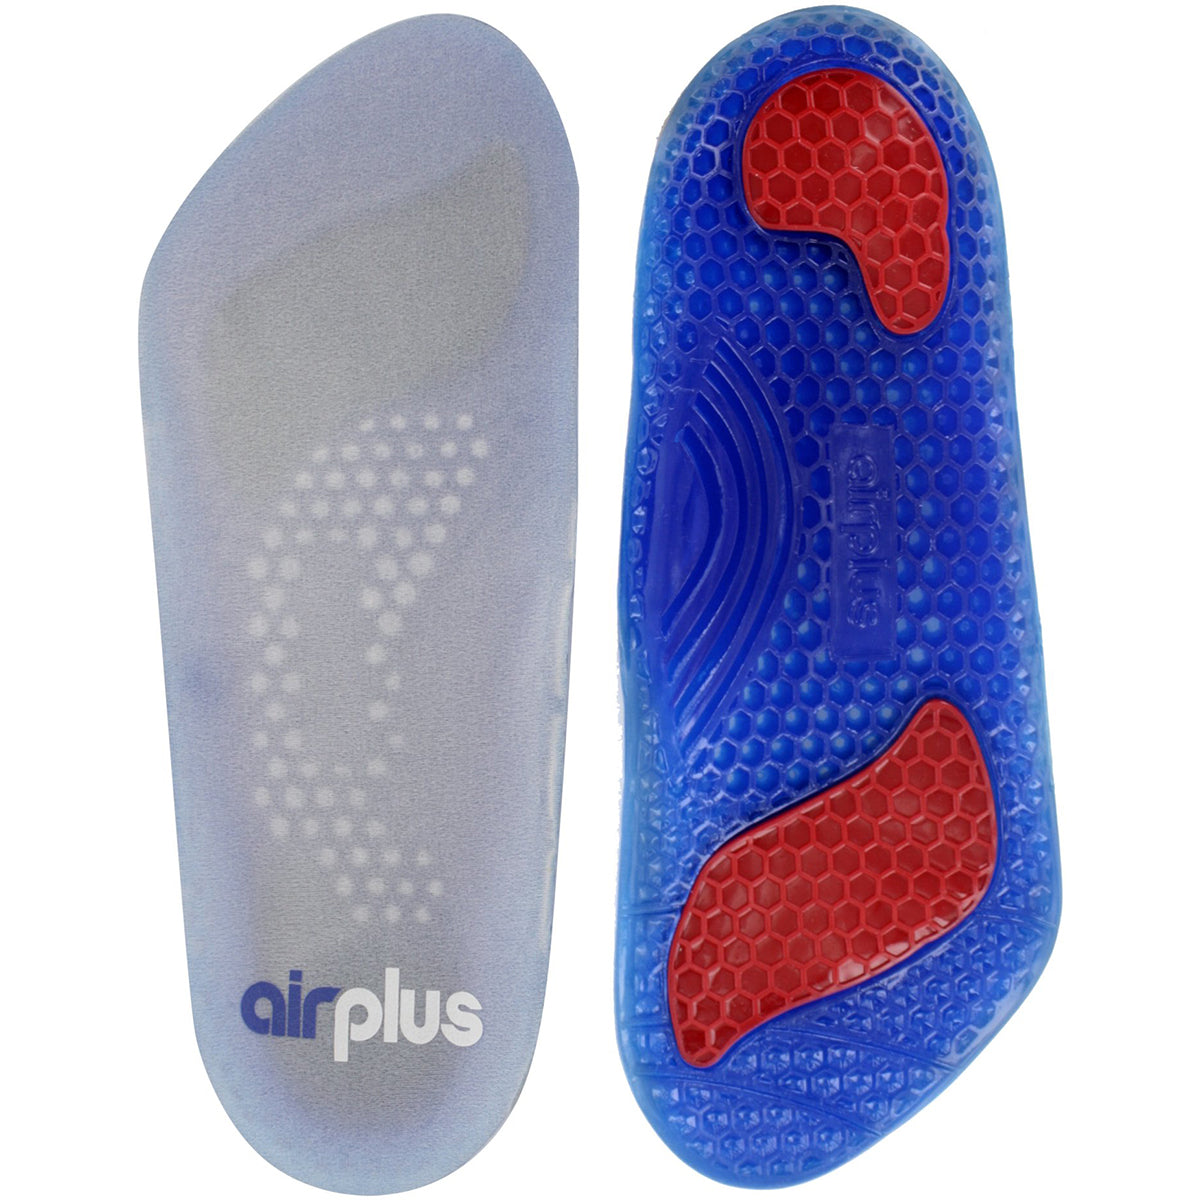 Airplus Men's Size 7-13 Gel Orthotic Stability 3/4 Length Shoe Insole Airplus